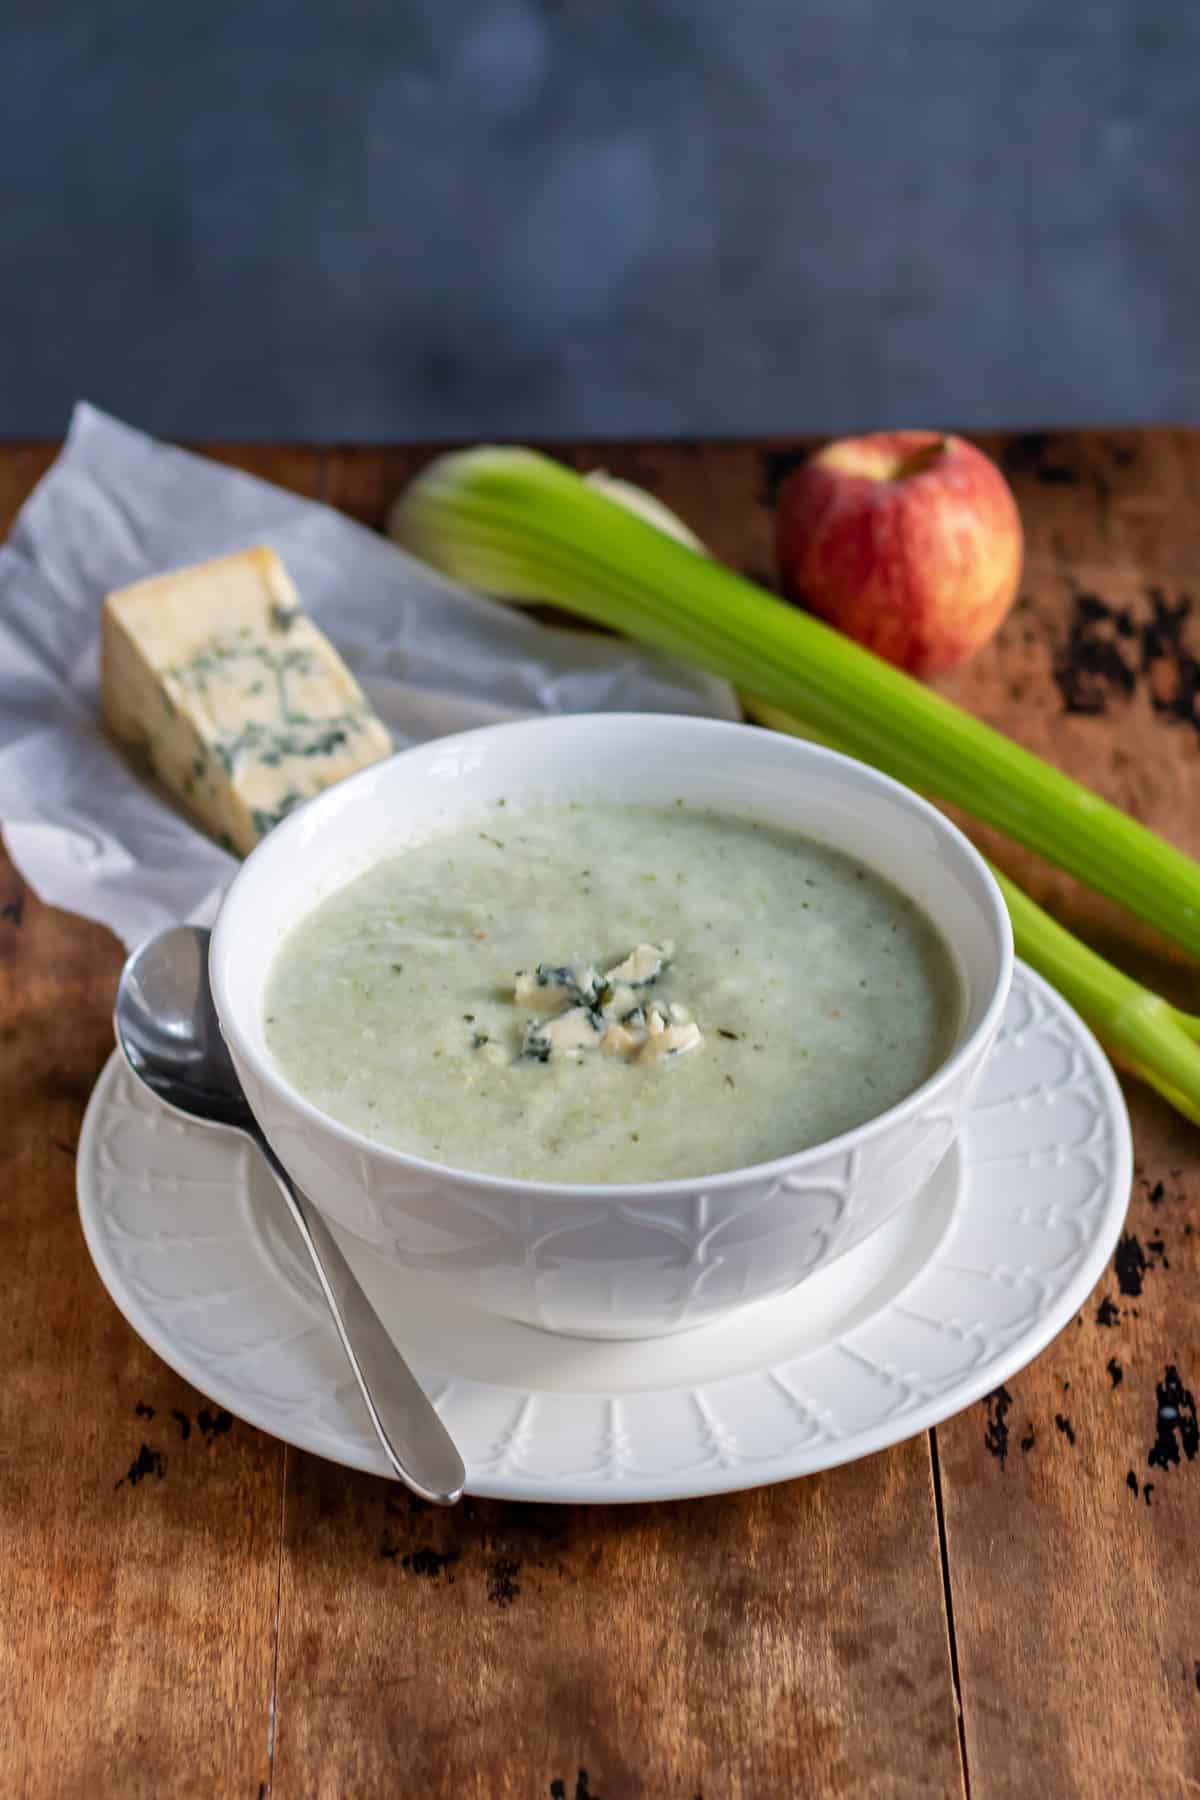 Table with soup, blue cheese, celery and apple.